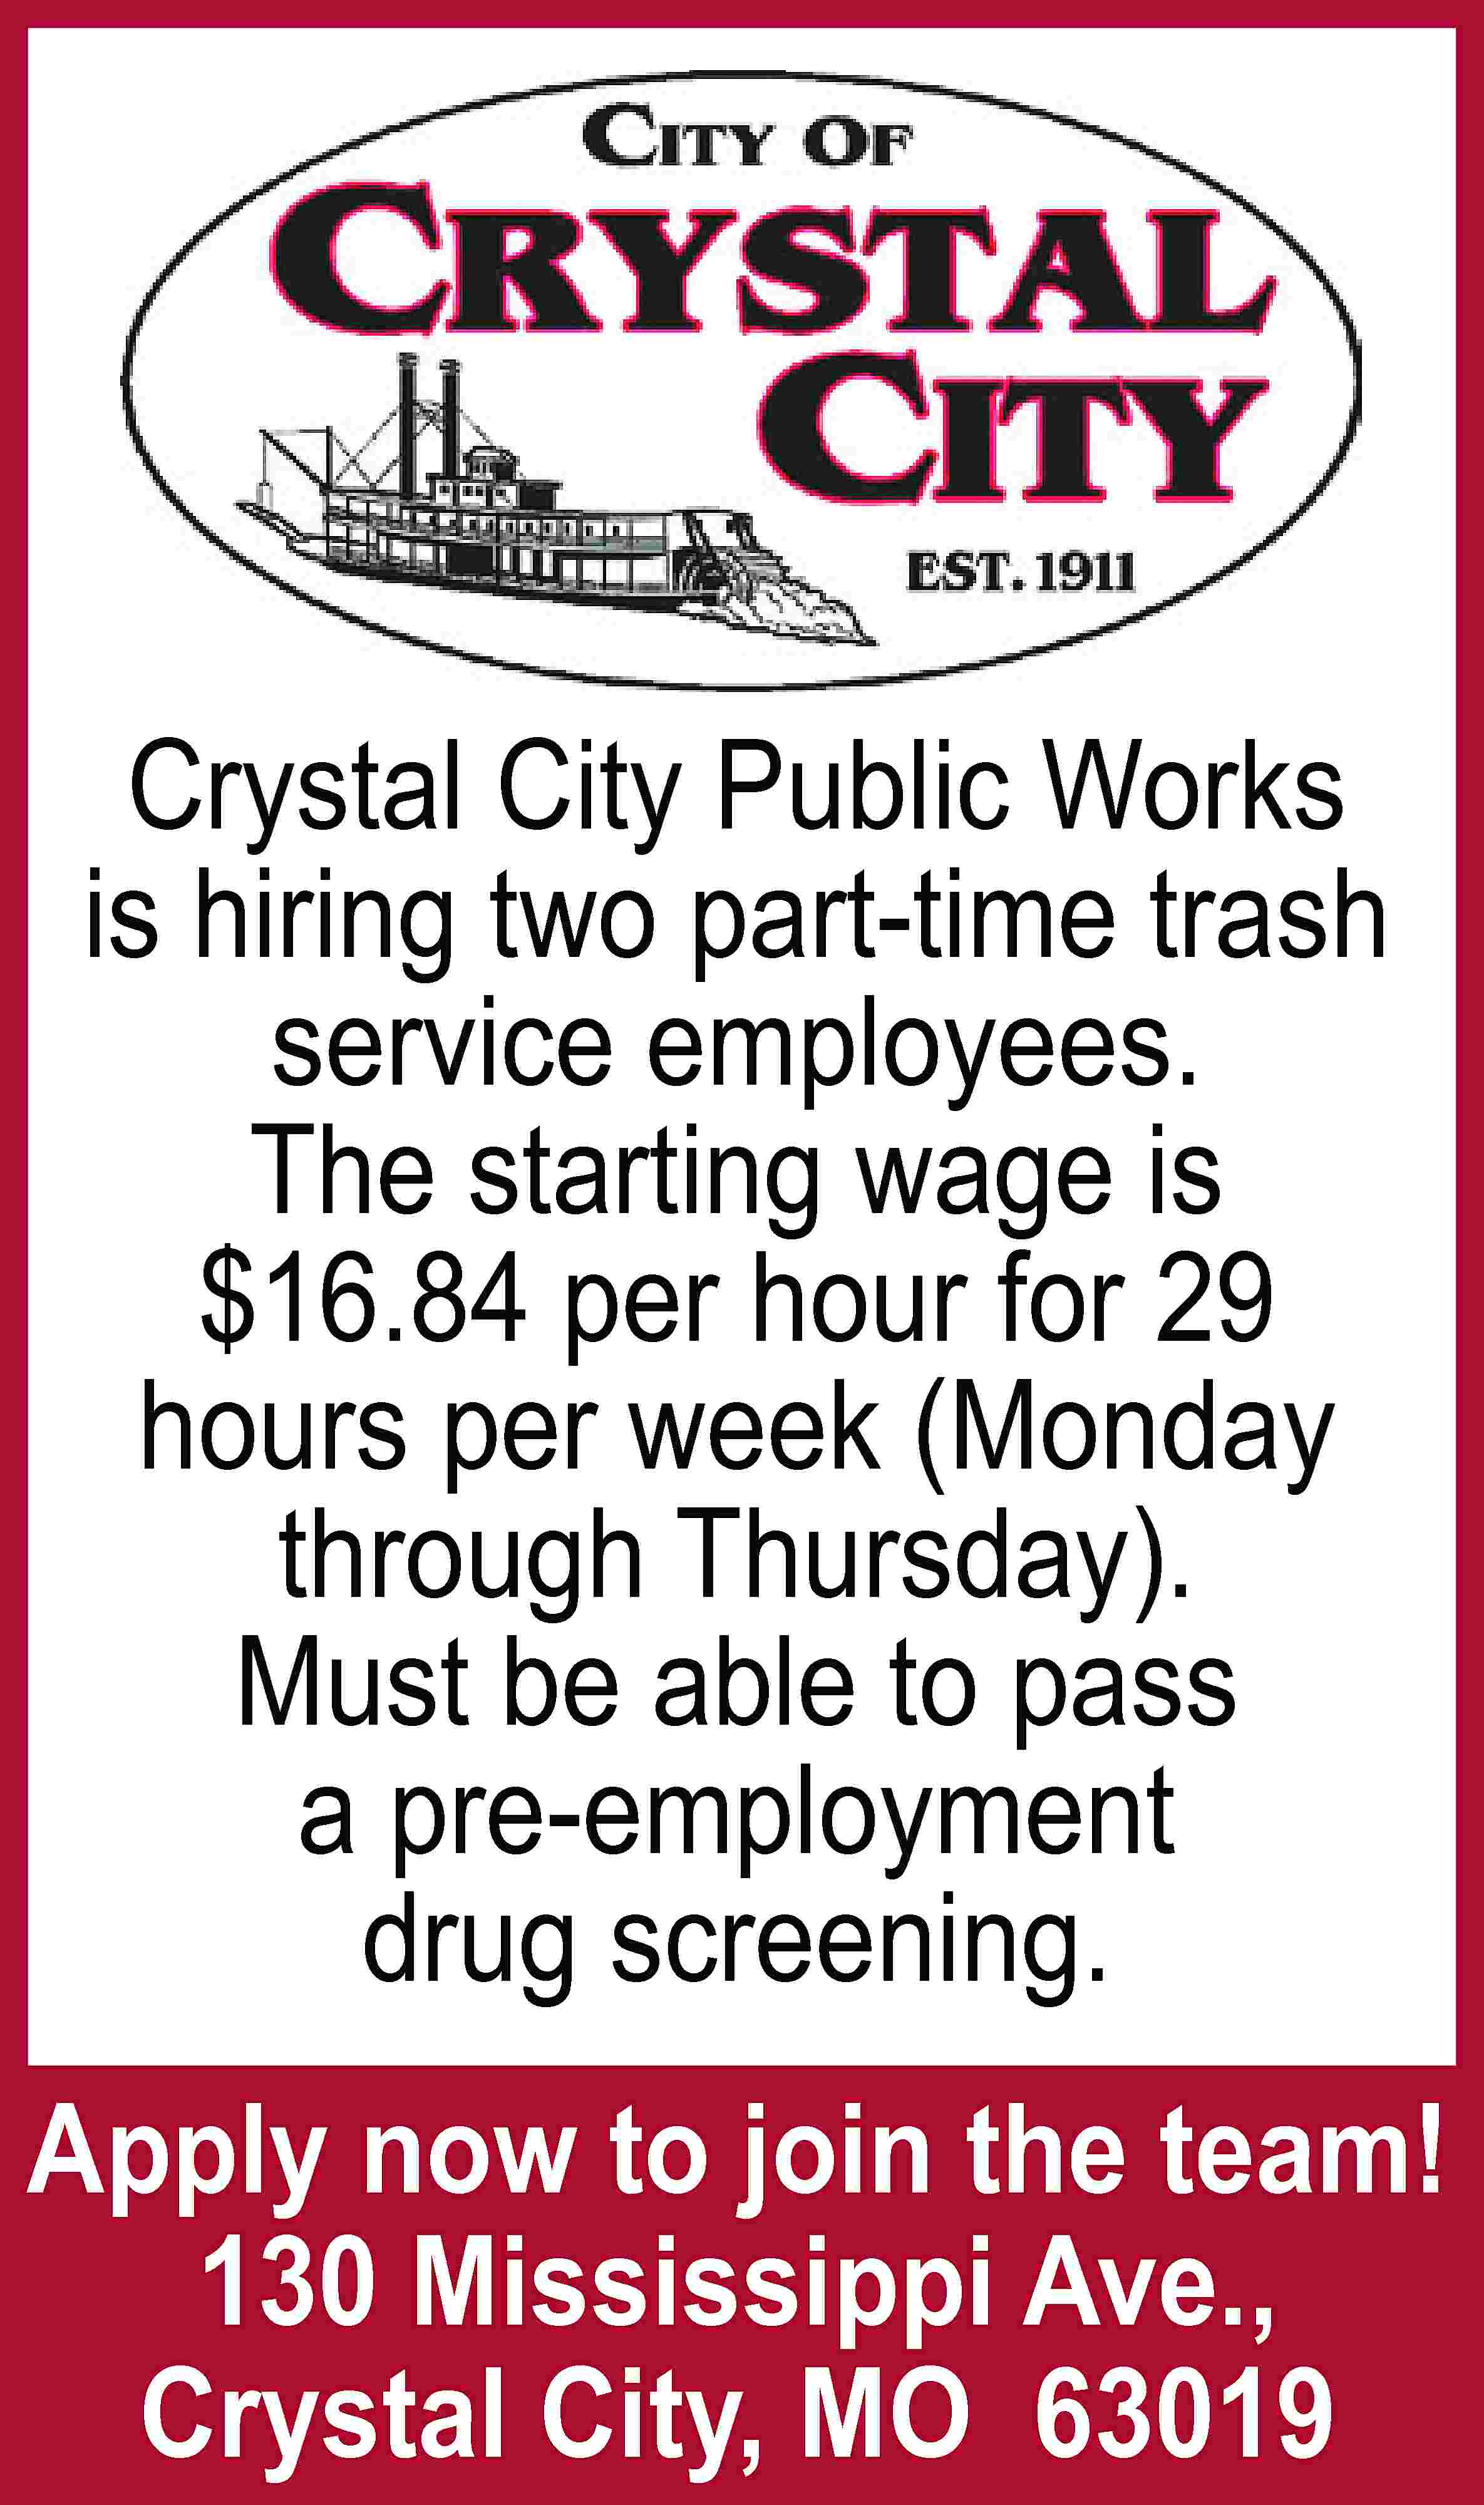 Crystal City Public Works is  Crystal City Public Works is hiring two part-time trash service employees. The starting wage is $16.84 per hour for 29 hours per week (Monday through Thursday). Must be able to pass a pre-employment drug screening. Apply now to join the team! 130 Mississippi Ave., Crystal City, MO 63019